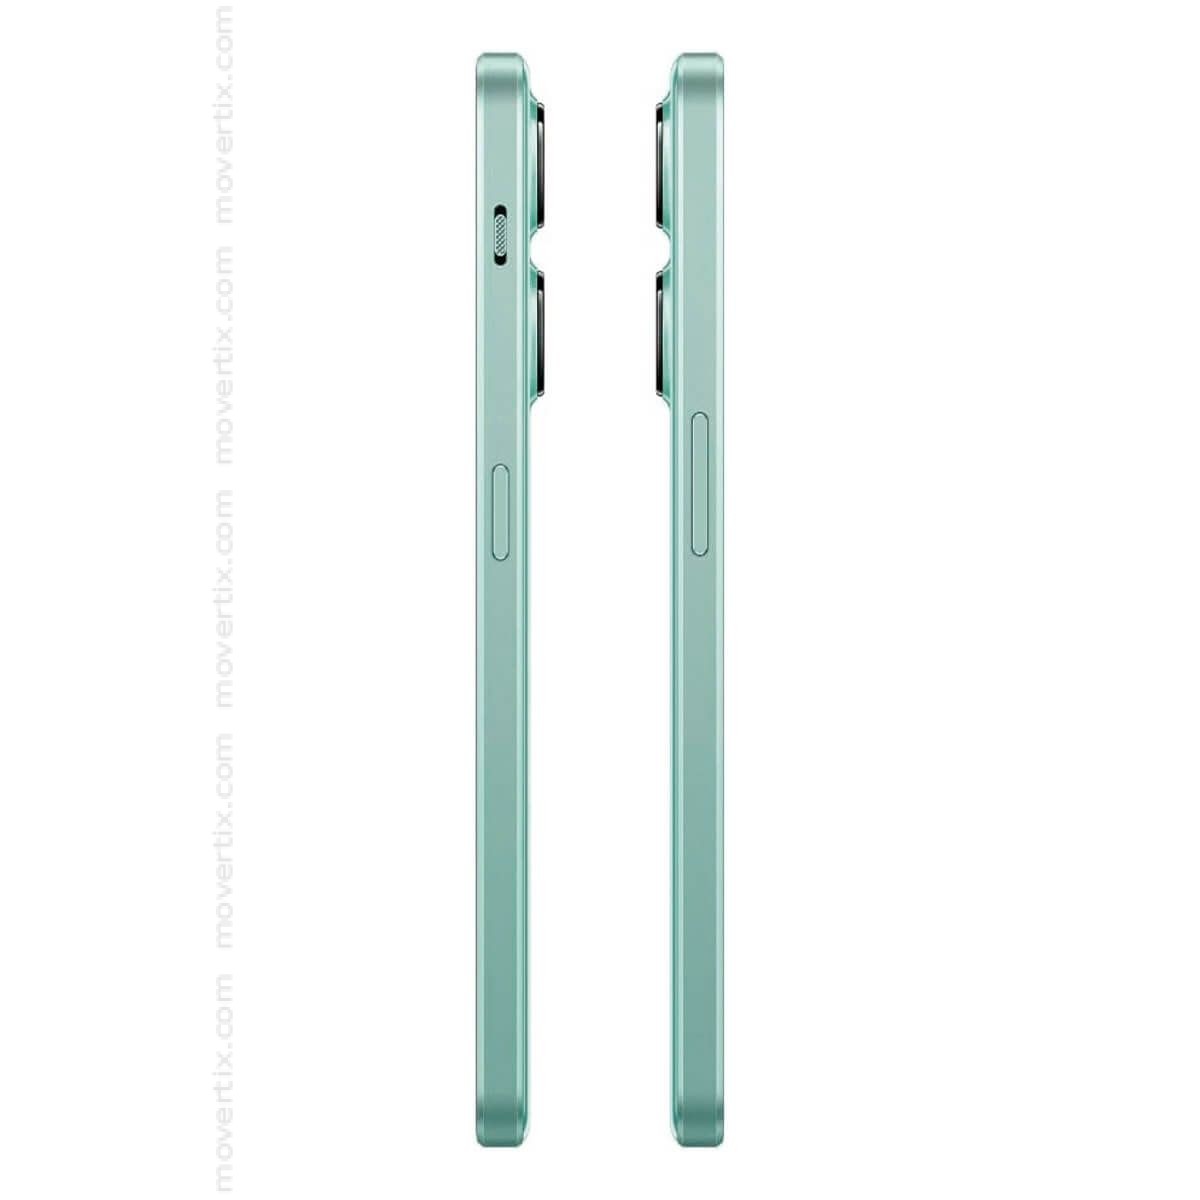 Mobile Phone ONEPLUS NORD 3 5G 16GB/256GB MISTY GREEN